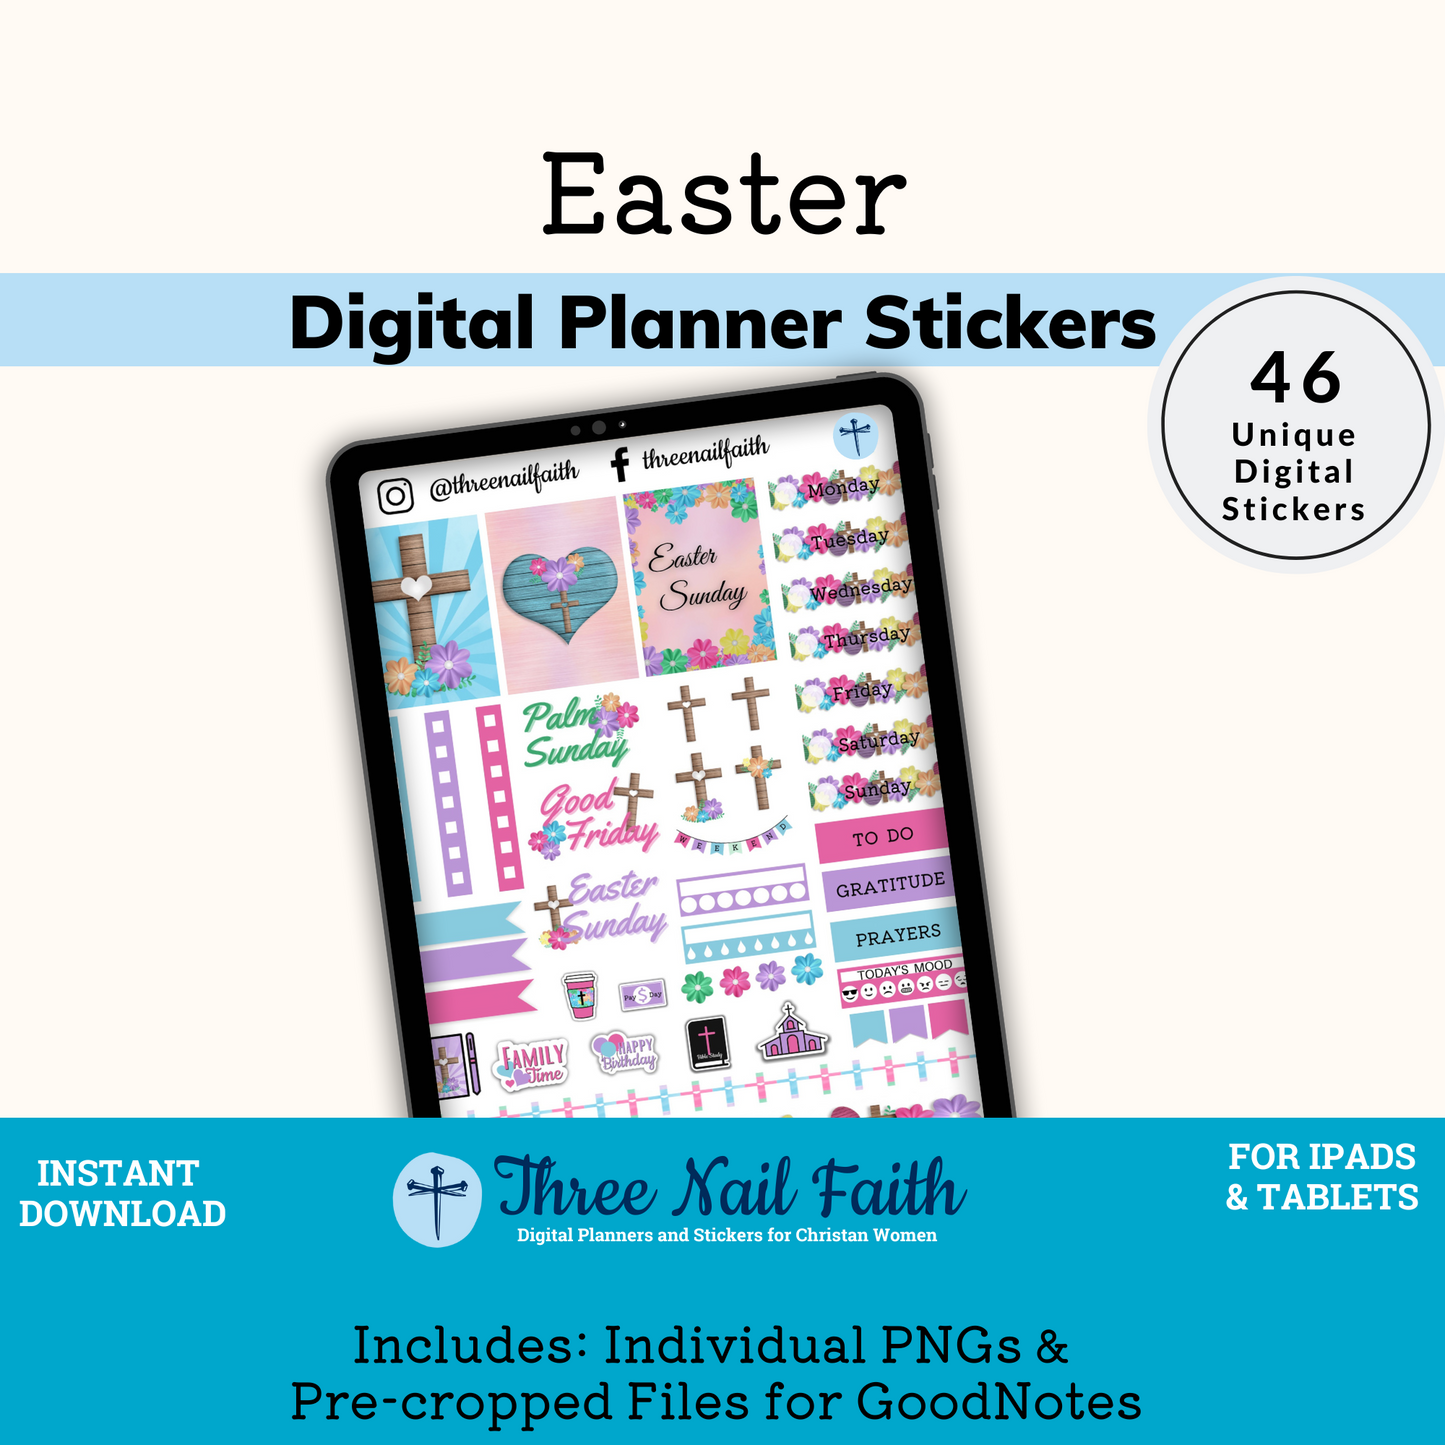 Easter digital sticker kit with 46 Digital stickers